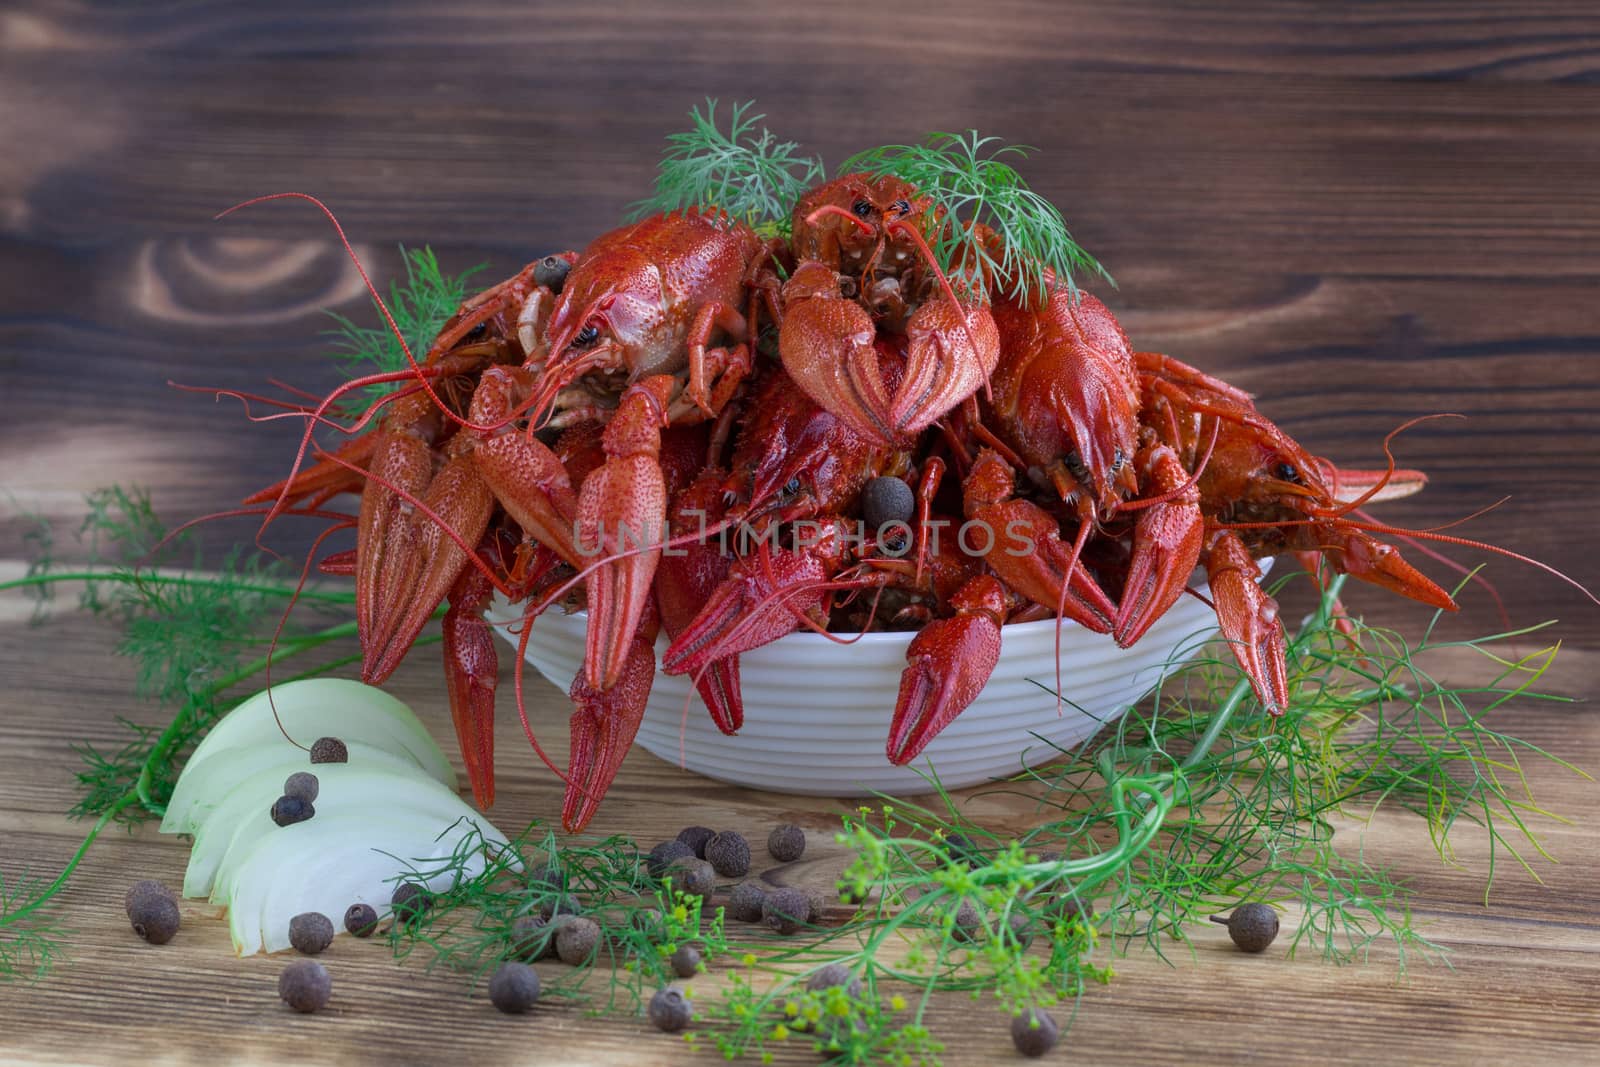 Plate of boiled crayfishes, fennel, onions, peppers on wooden ba by VeraVerano